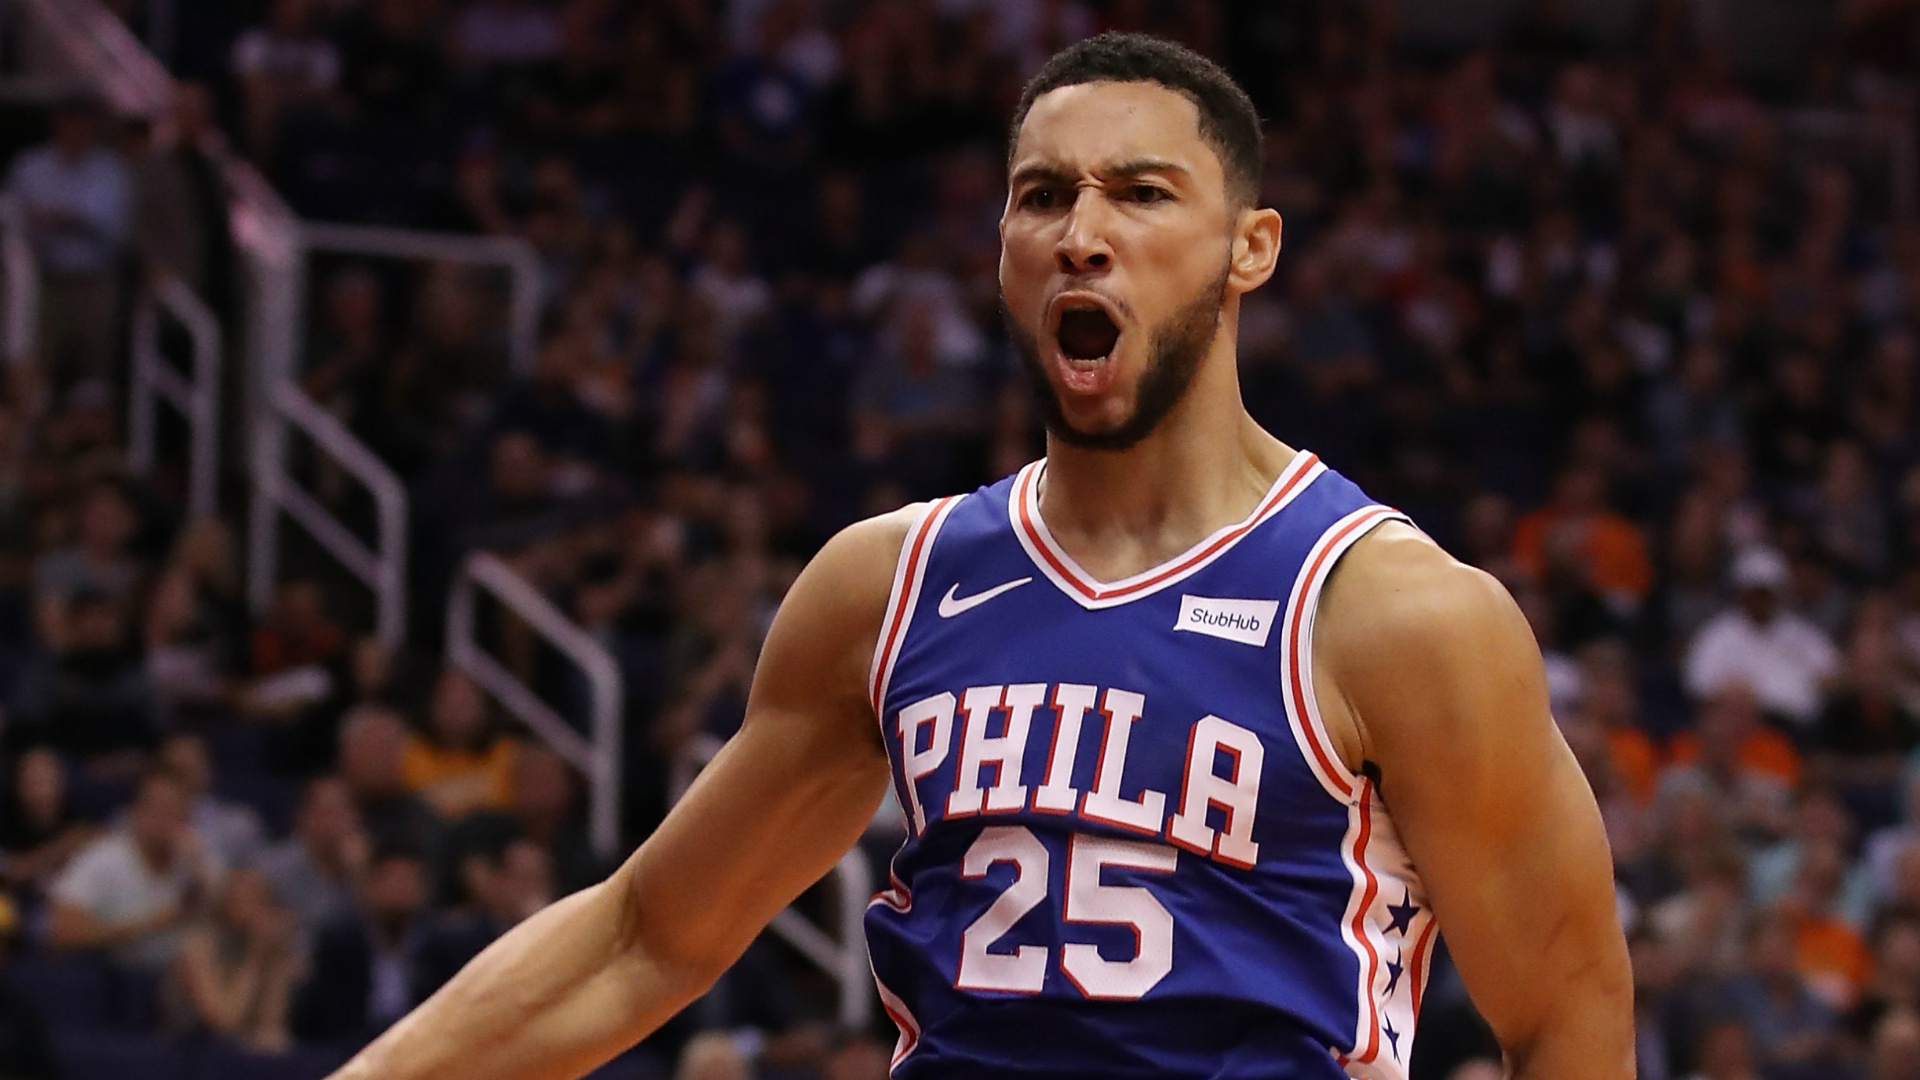 For the first time in his NBA career, Ben Simmons made a successful attempt from beyond the arc.